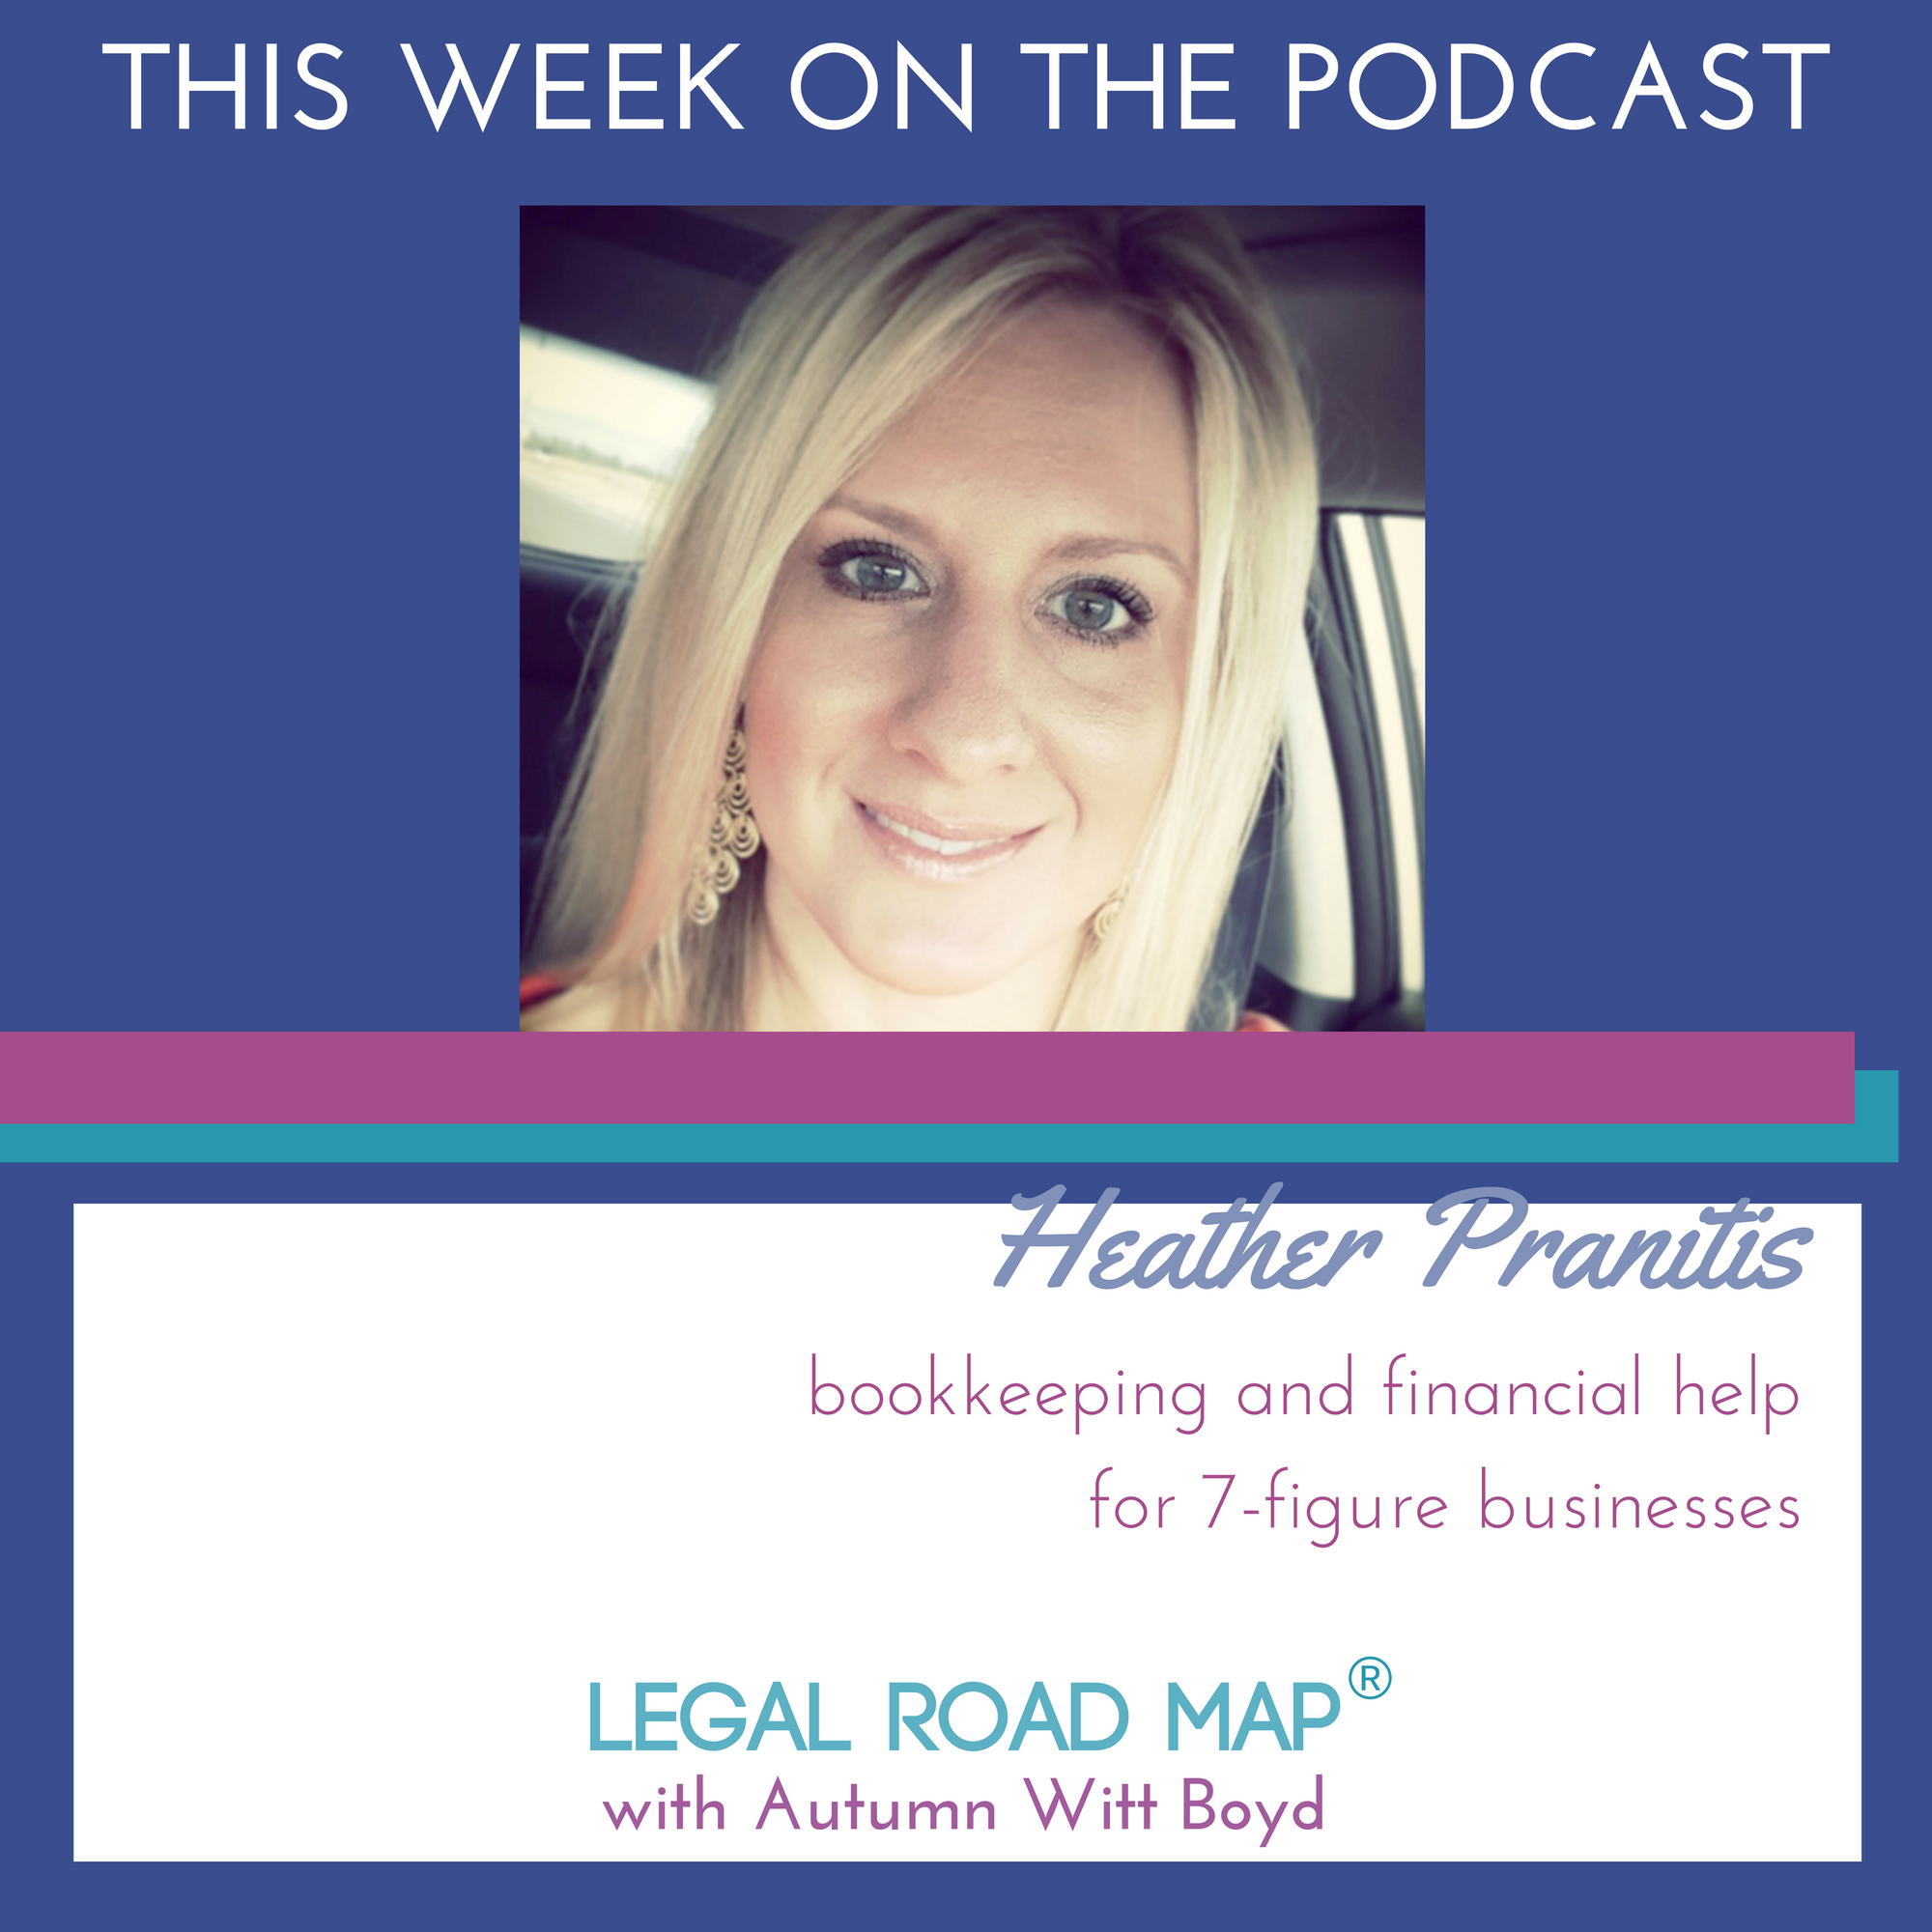 Bookkeeping and financial help for 7-figure businesses with Heather Pranitis (Legal Road Map® Podcast S3E43)